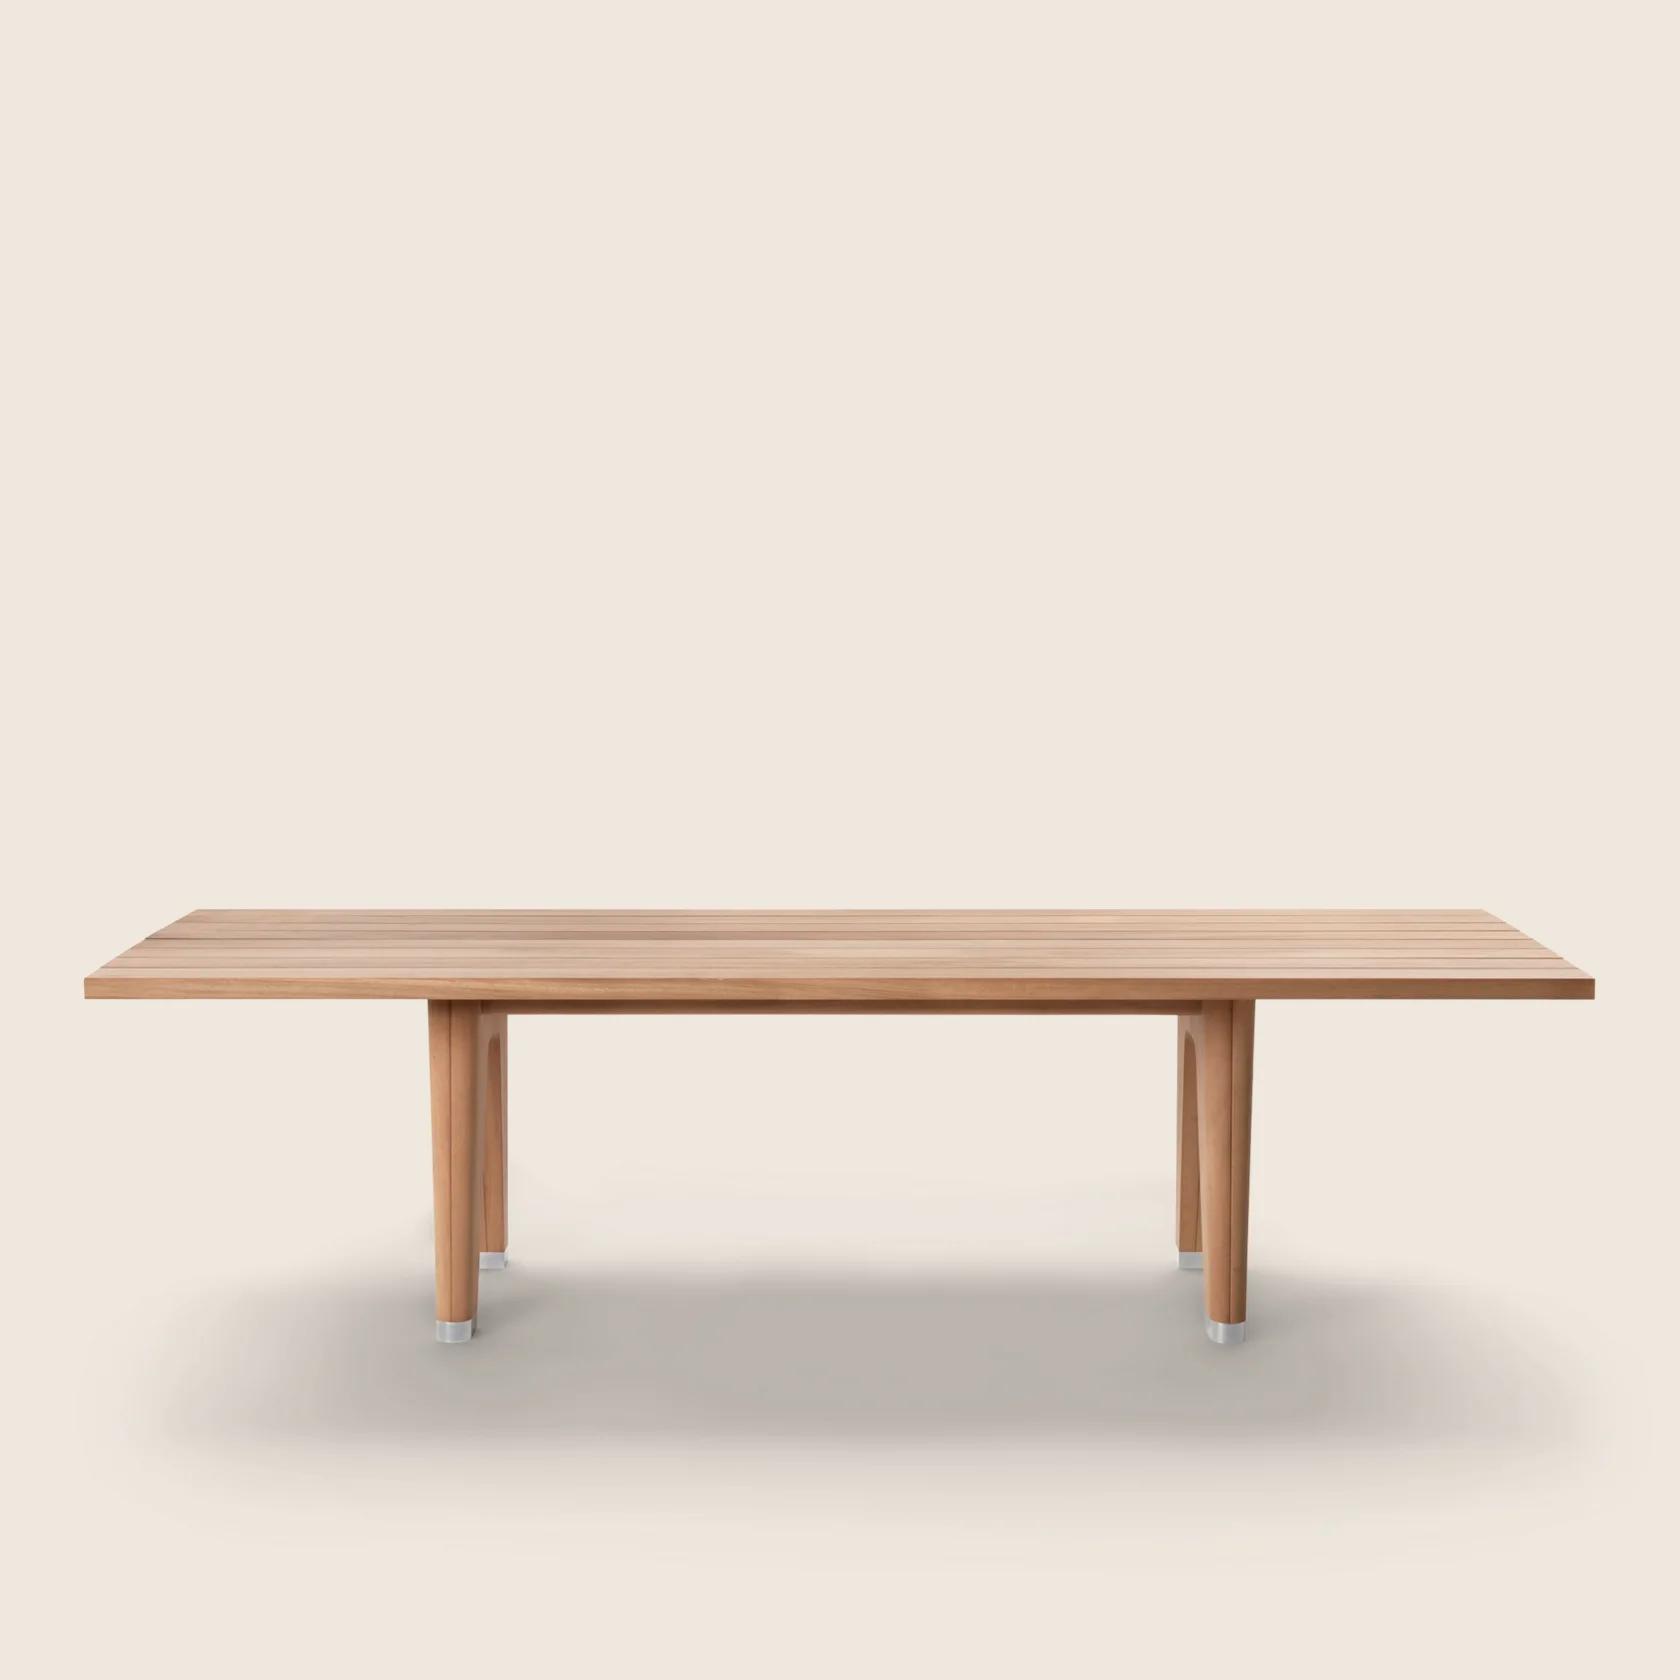 0240L0_MONREALE OUTDOOR_TABLE_01.png